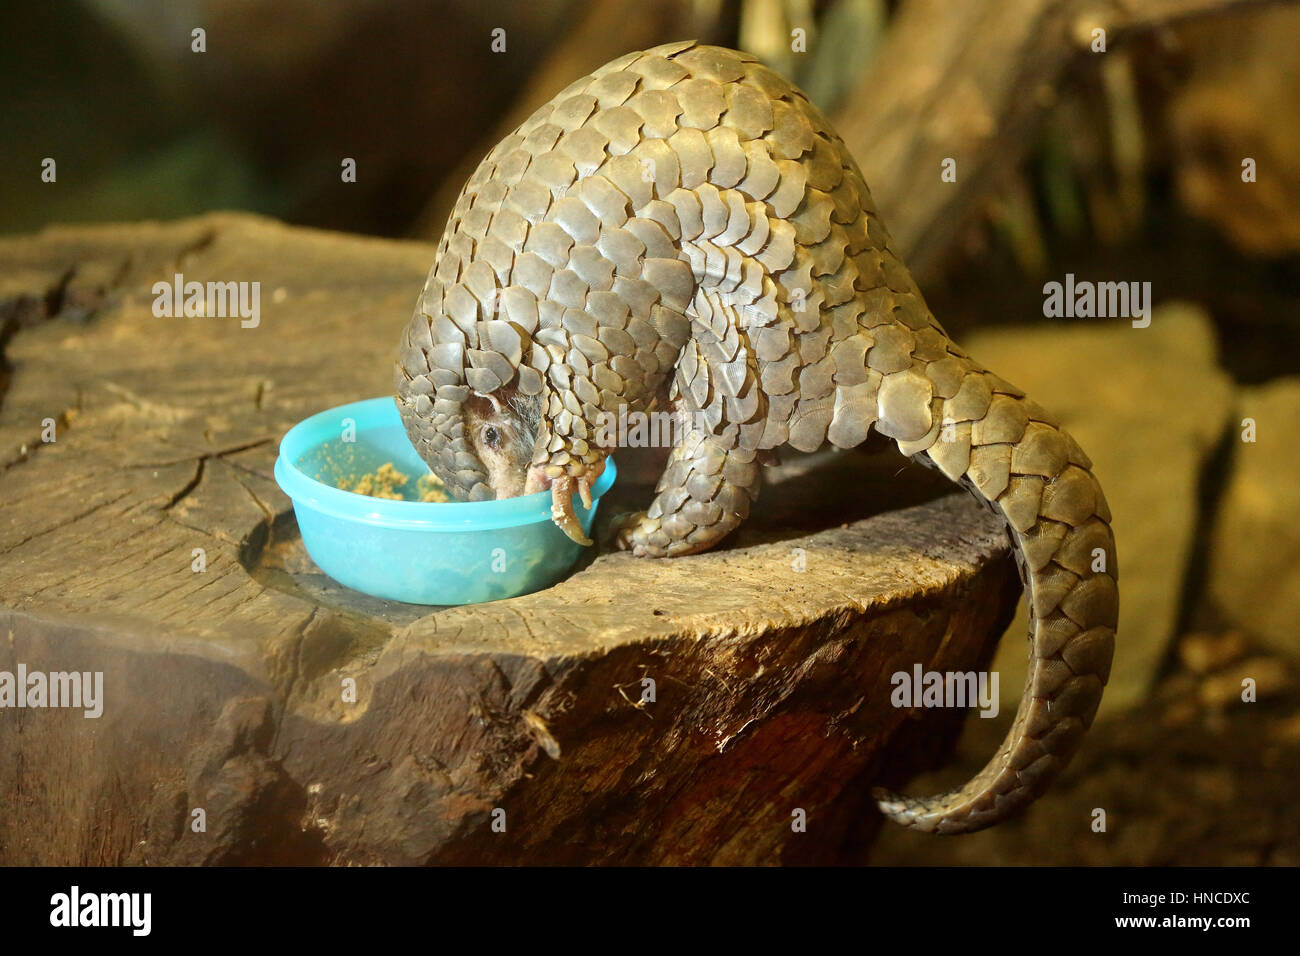 Leipzig, Germany. 01st Feb, 2017. The female pangolin Quesan eats from a bowl in the zoo in Leipzig, Germany, 01 February 2017. Pangolins are the most commonly smuggled animals in the world, partly due to the fact that their scales are believed to possess medicinal qualities and their flesh is often viewed as a delicacy. The zoo in Leipzig now plans on breeding them. Photo: Jan Woitas/dpa-Zentralbild/dpa/Alamy Live News Stock Photo